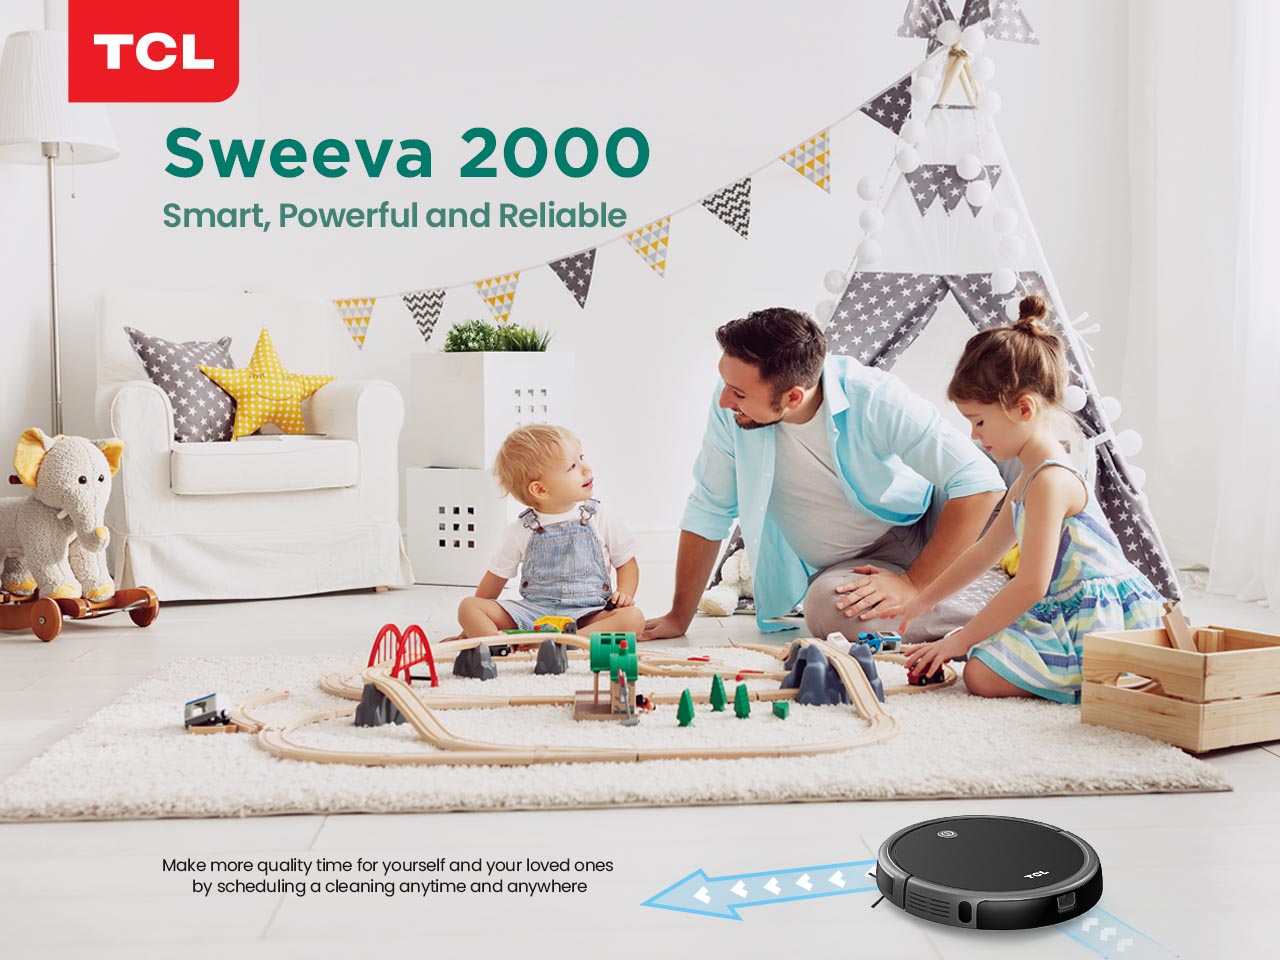 TCL launches Robot Vacuum Cleaner Sweeva 2000 in Pakistan